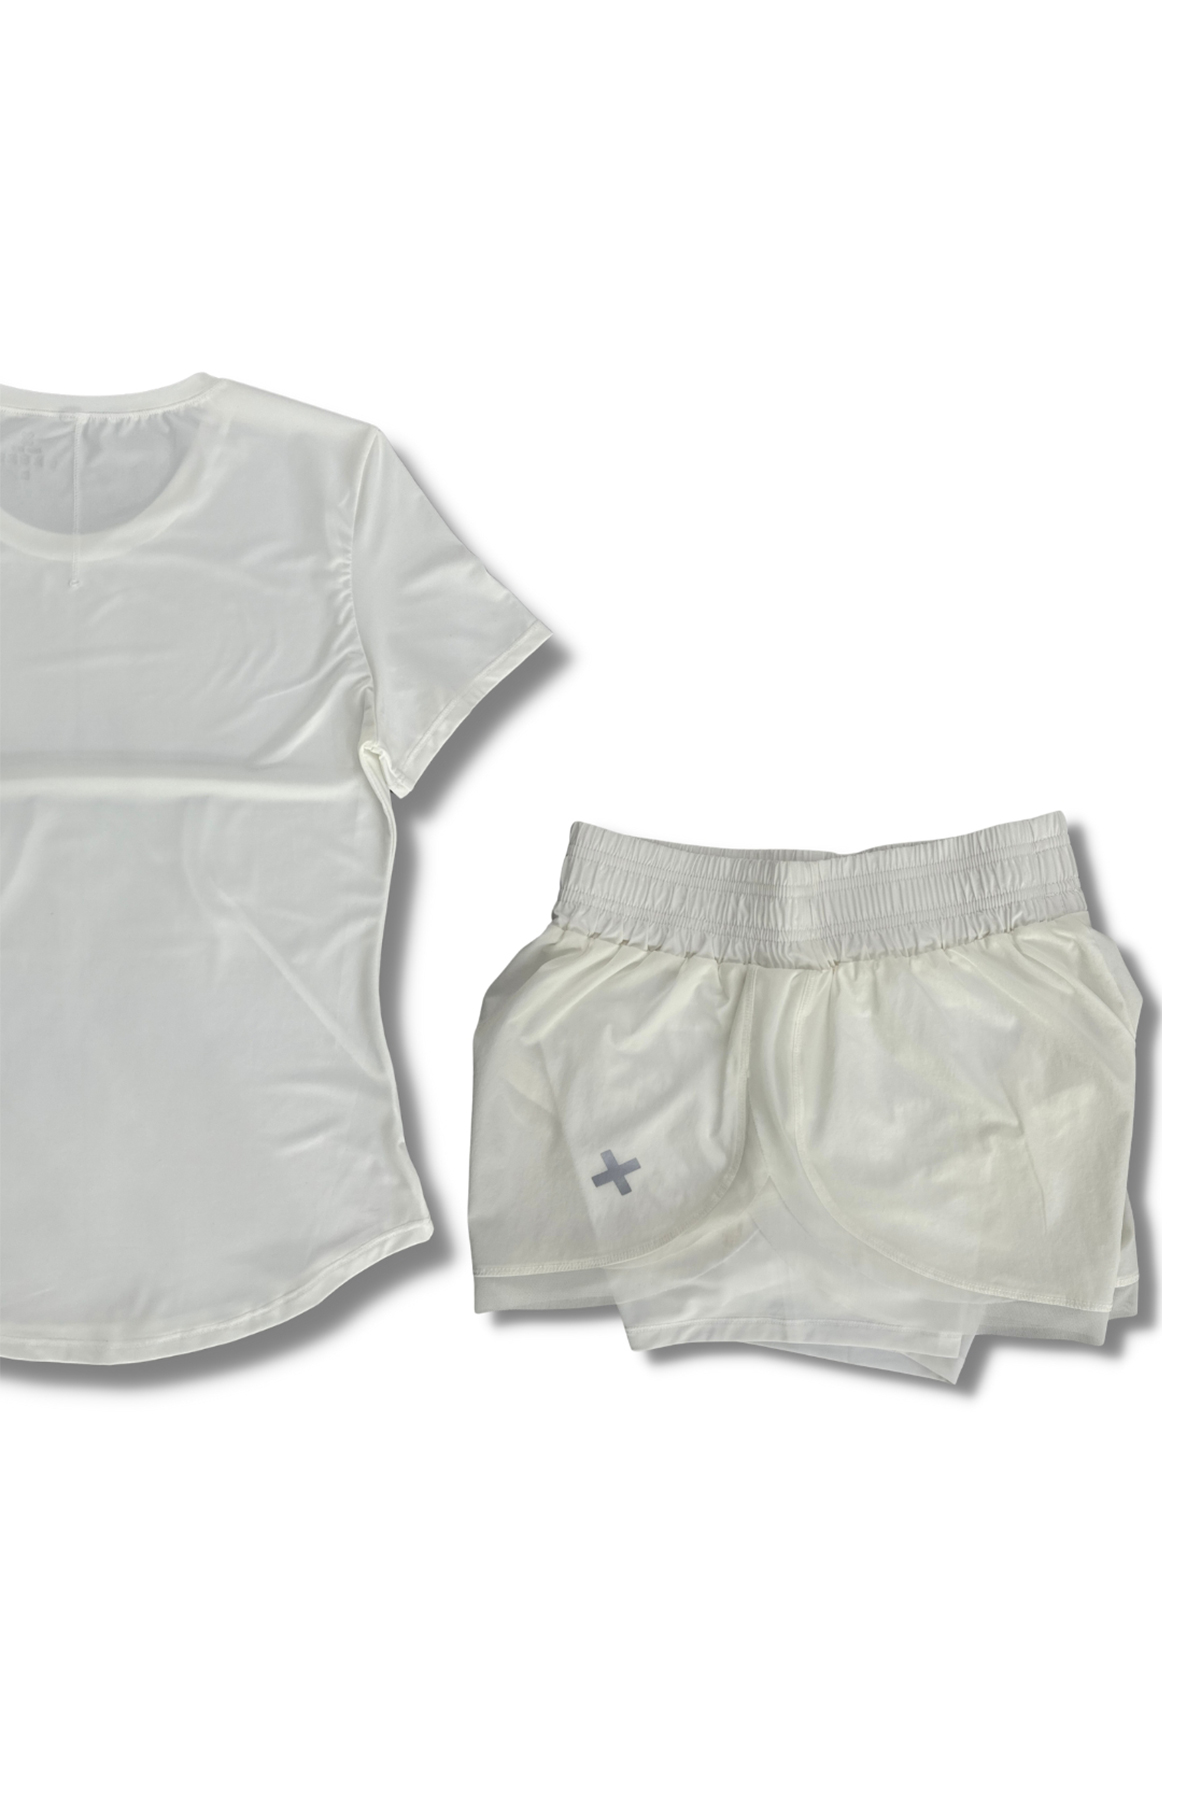 Runners-Choice-T-shirt-and-2-in-1-Running-Shorts-Set-white-back